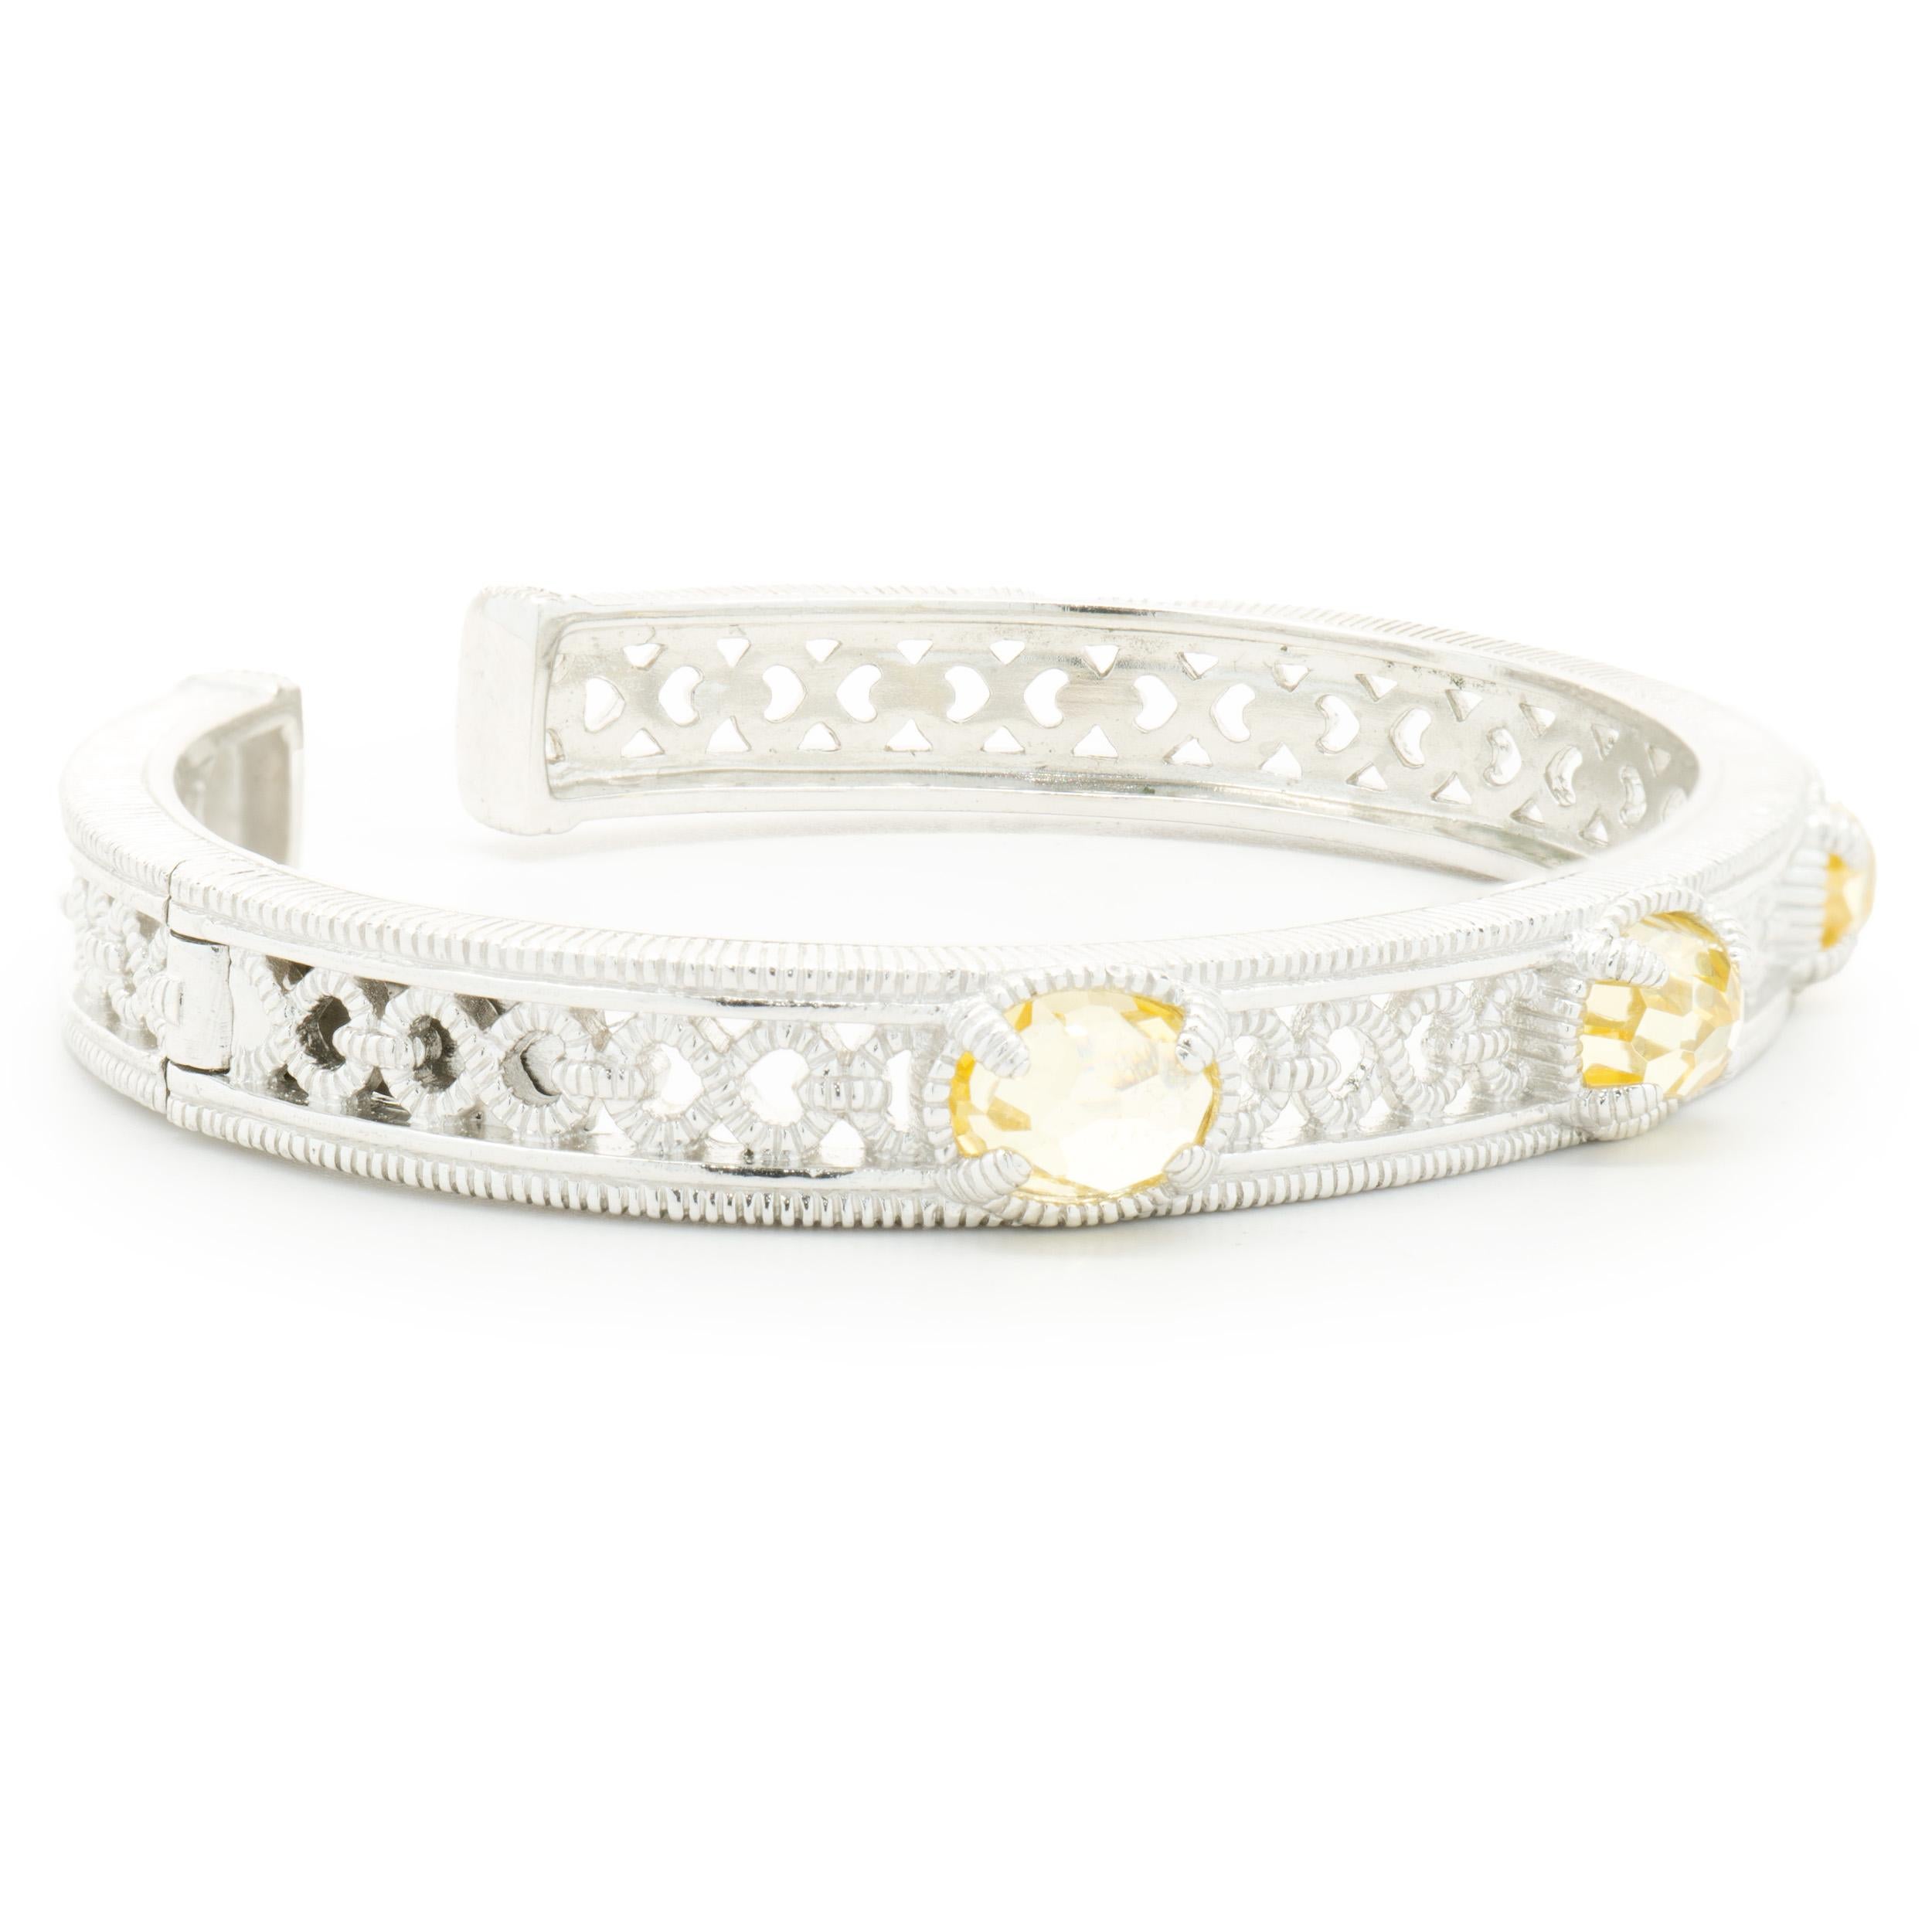 Designer: Judith Ripka
Material: sterling silver 
Dimensions: bracelet will fit a 6.25-inch wrist 
Weight: 26.94 grams